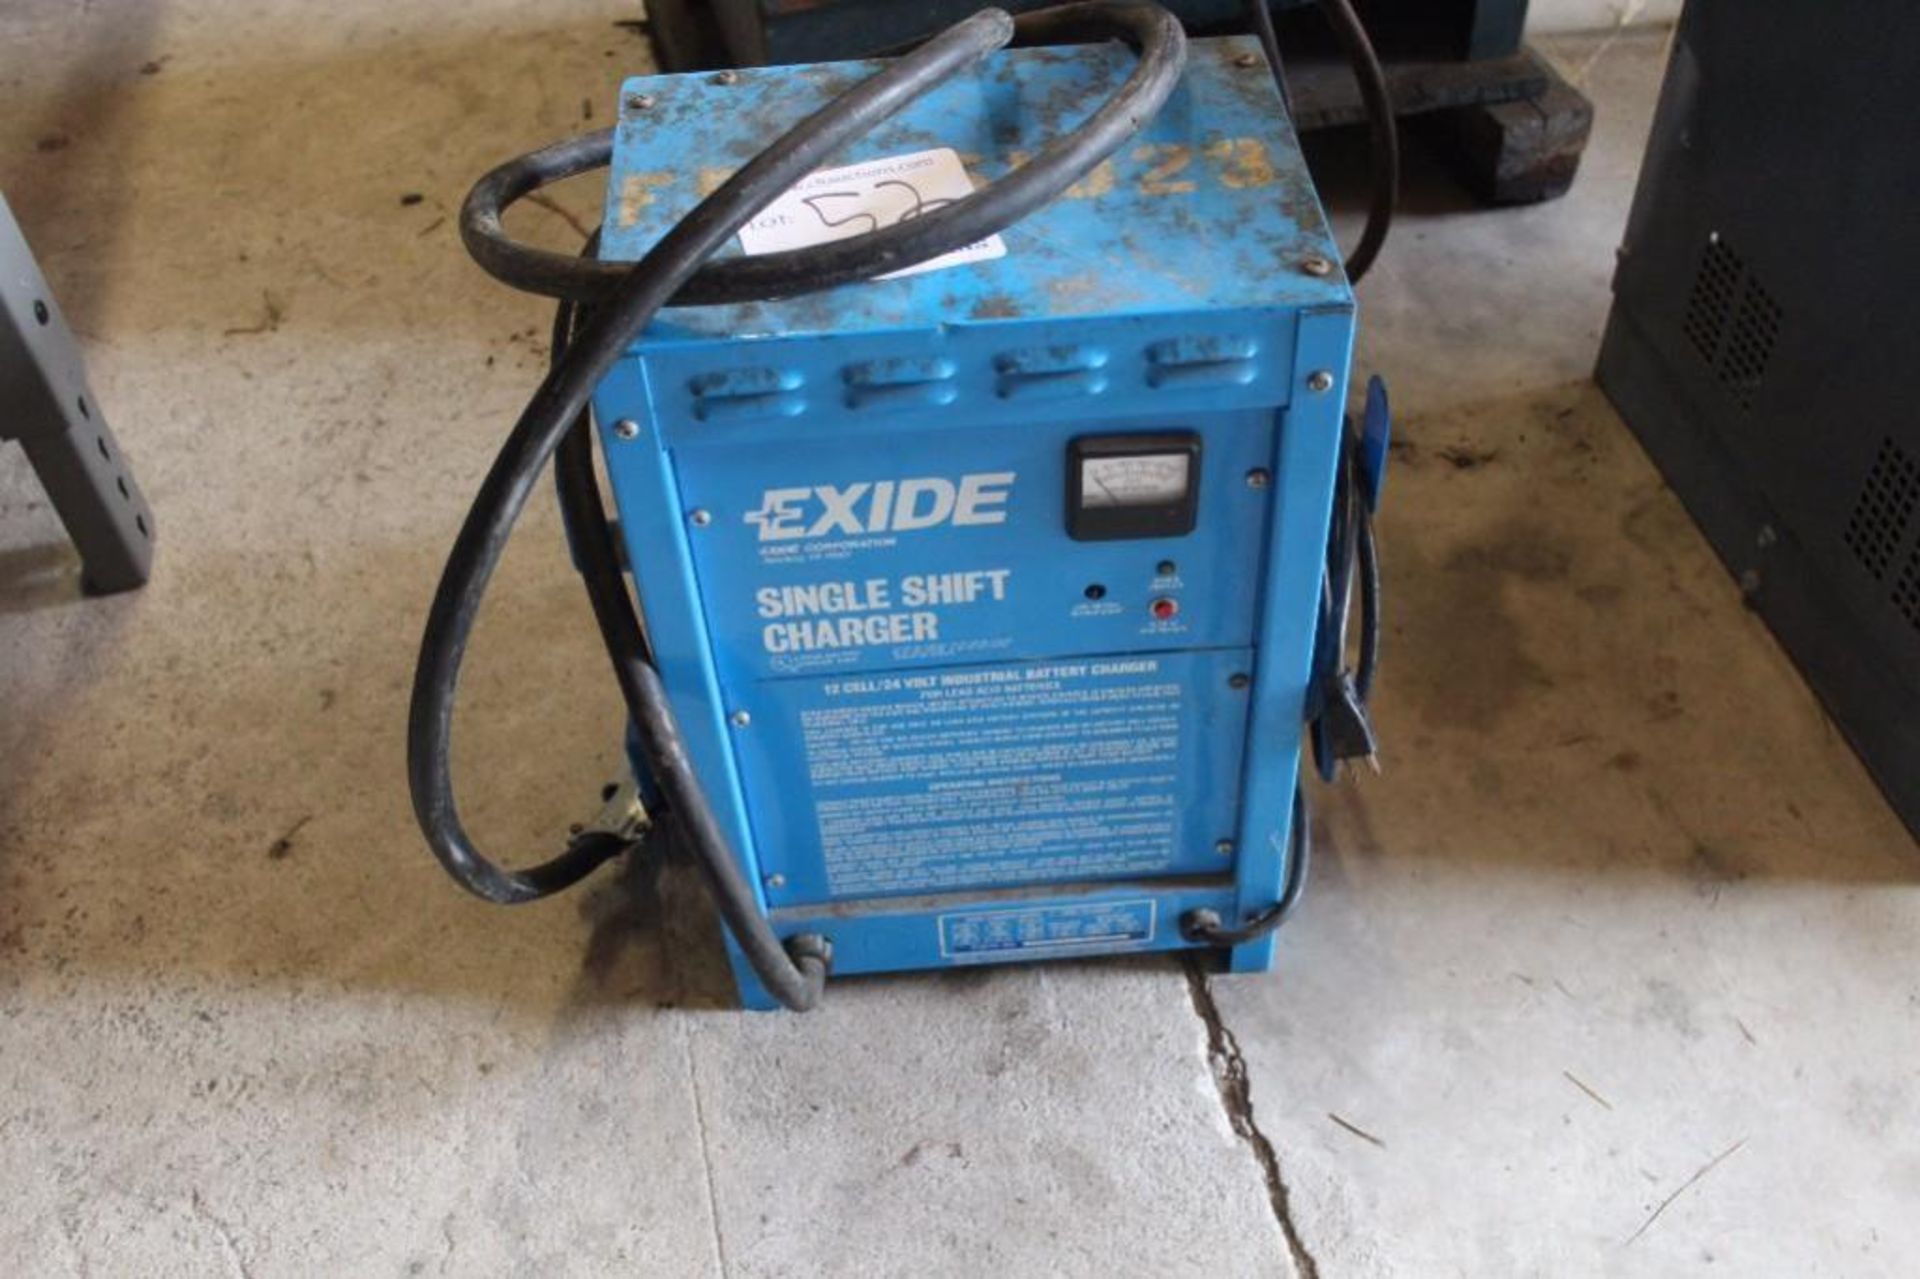 Exide single shift charger 12 cell 24 volt industrial battery charger 1ph, 120 volt - Image 2 of 3